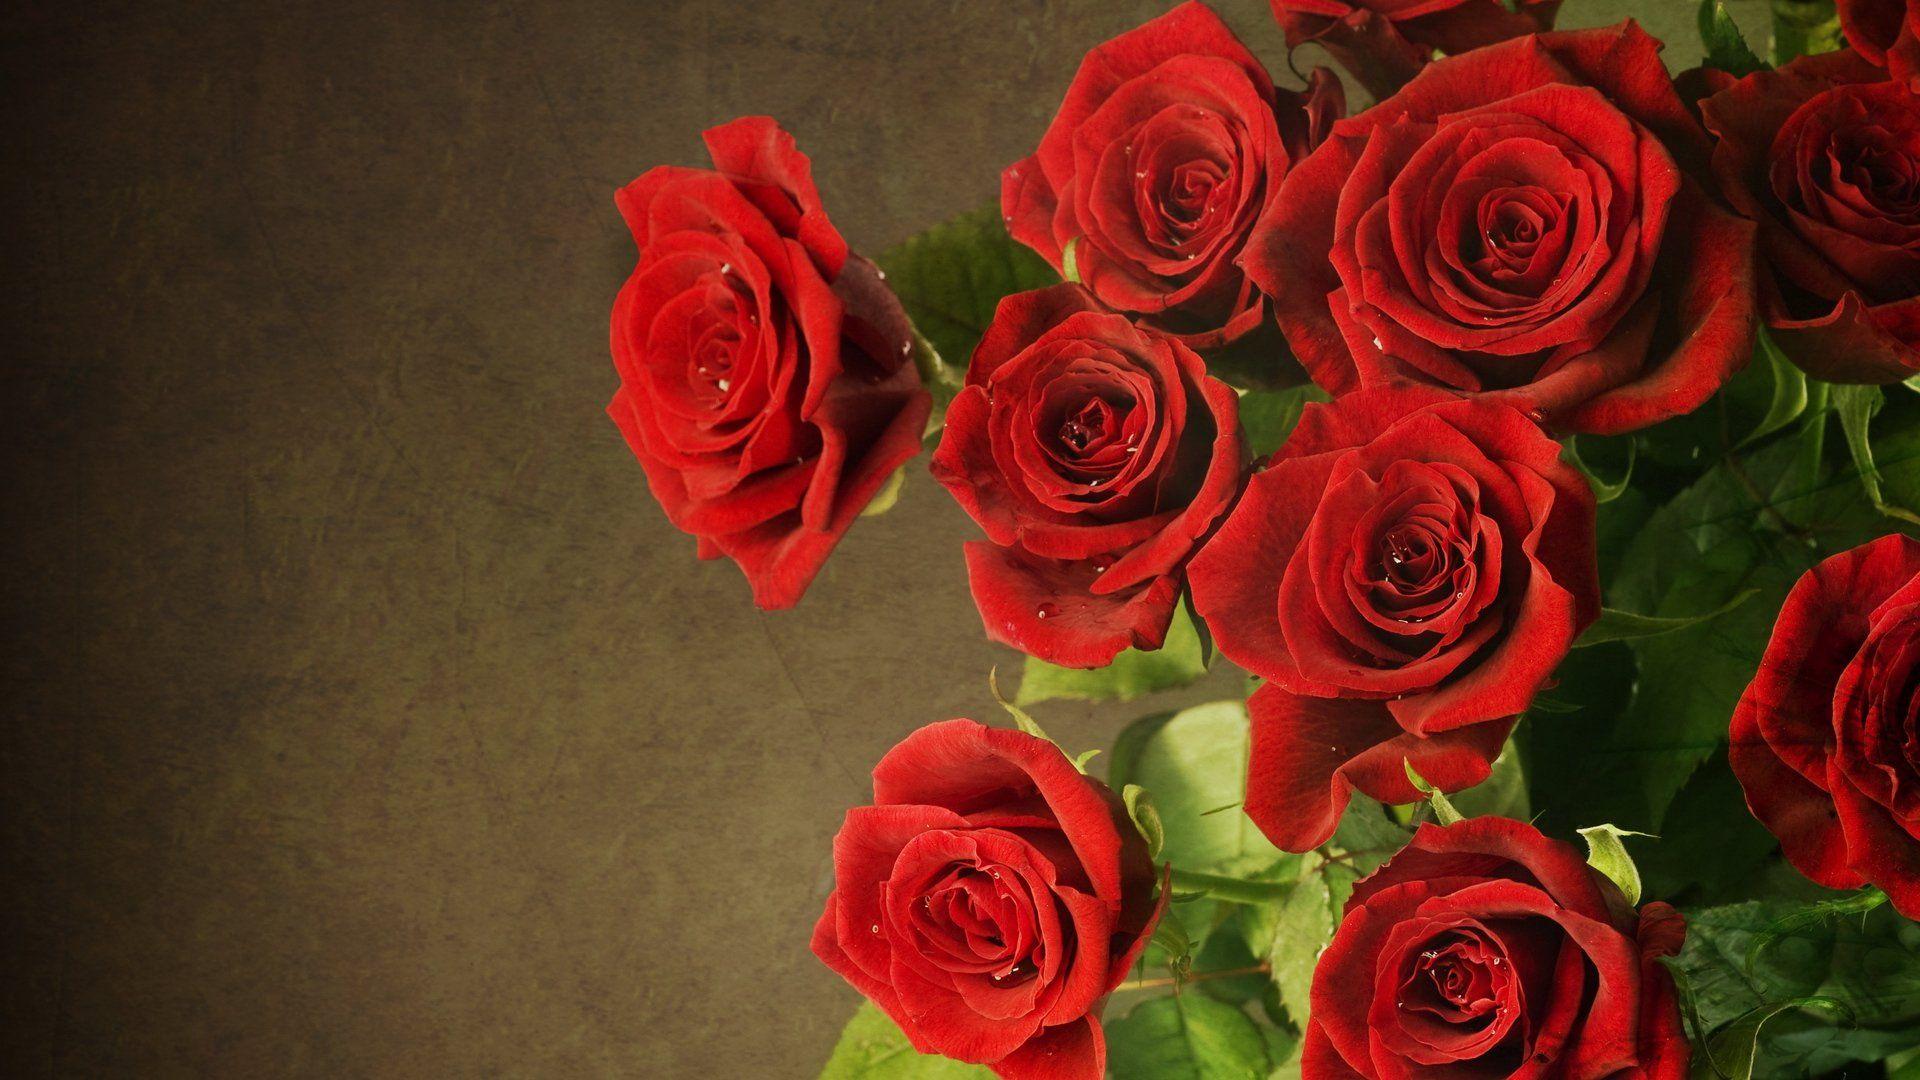 Red Rose Full HD Wallpaper High Quality Photo For Mobile Phones